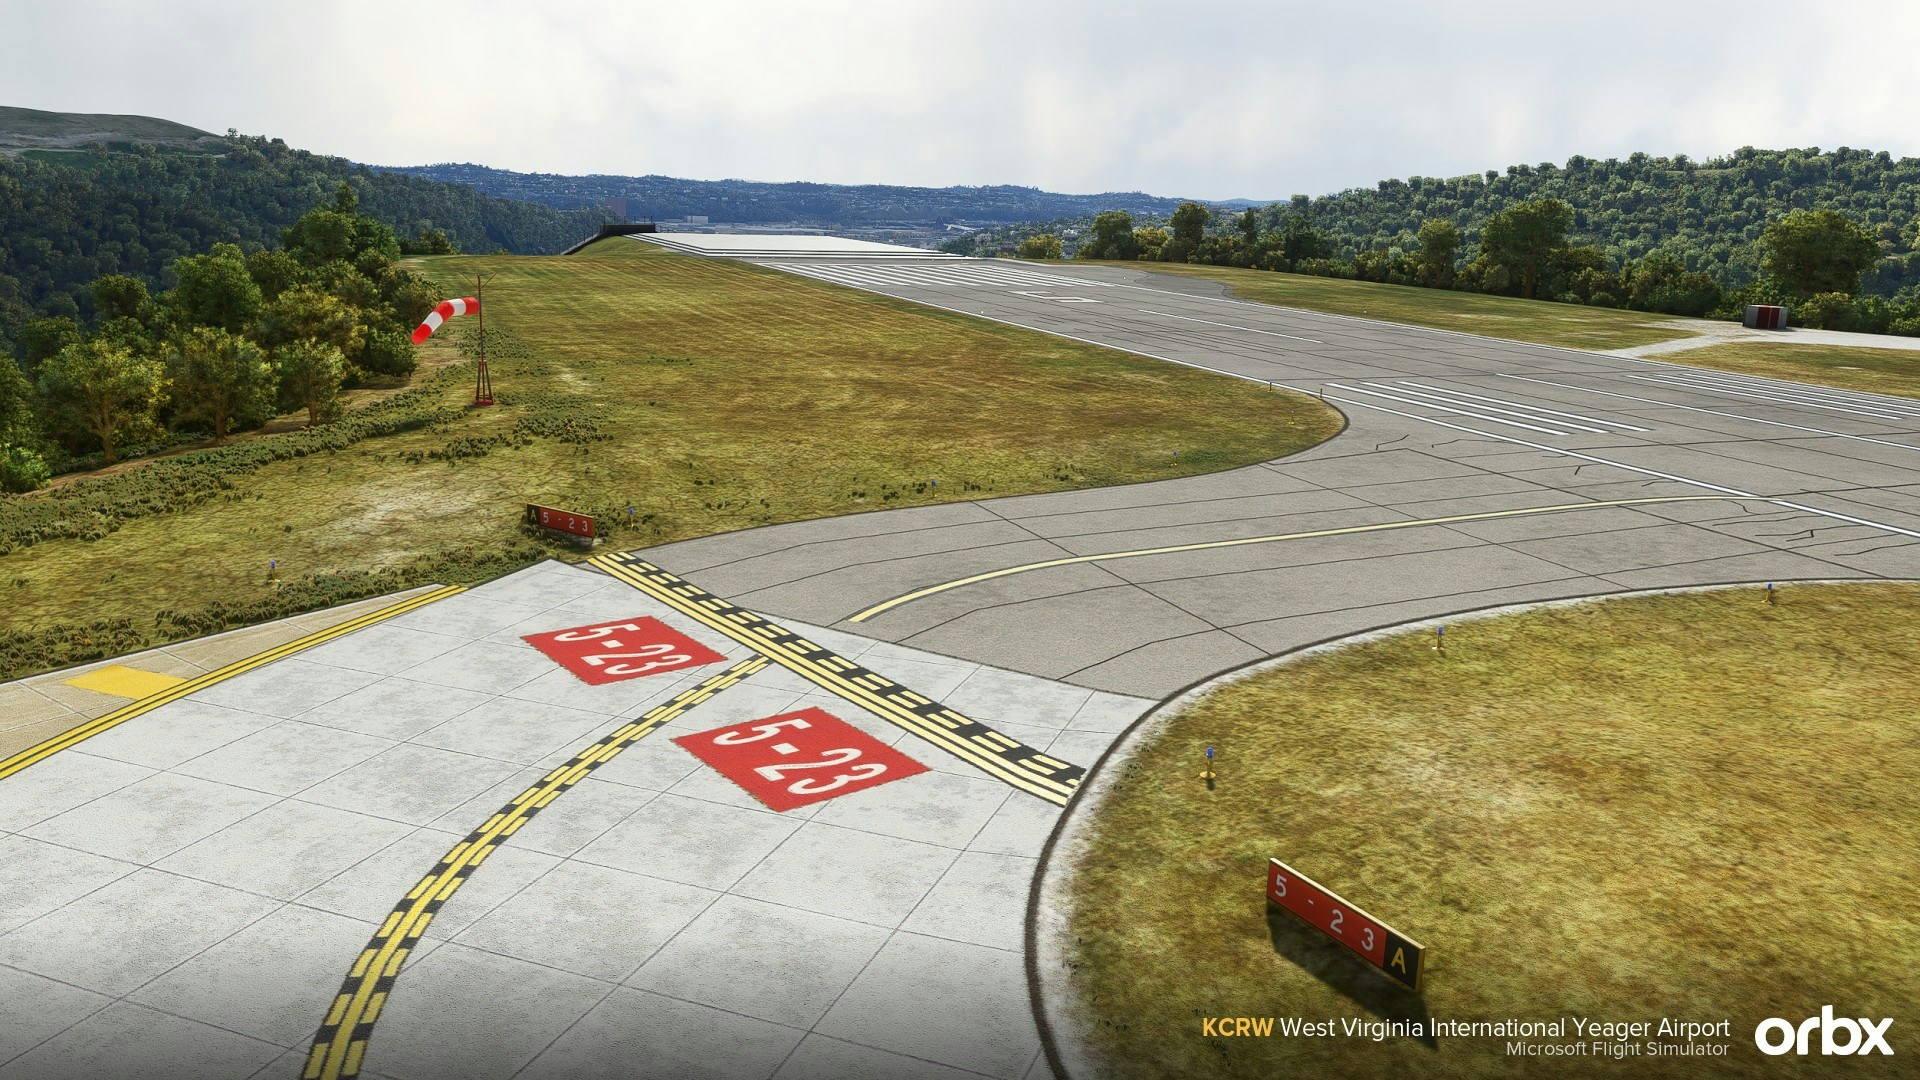 Orbx Releases Yeager International Airport for MSFS